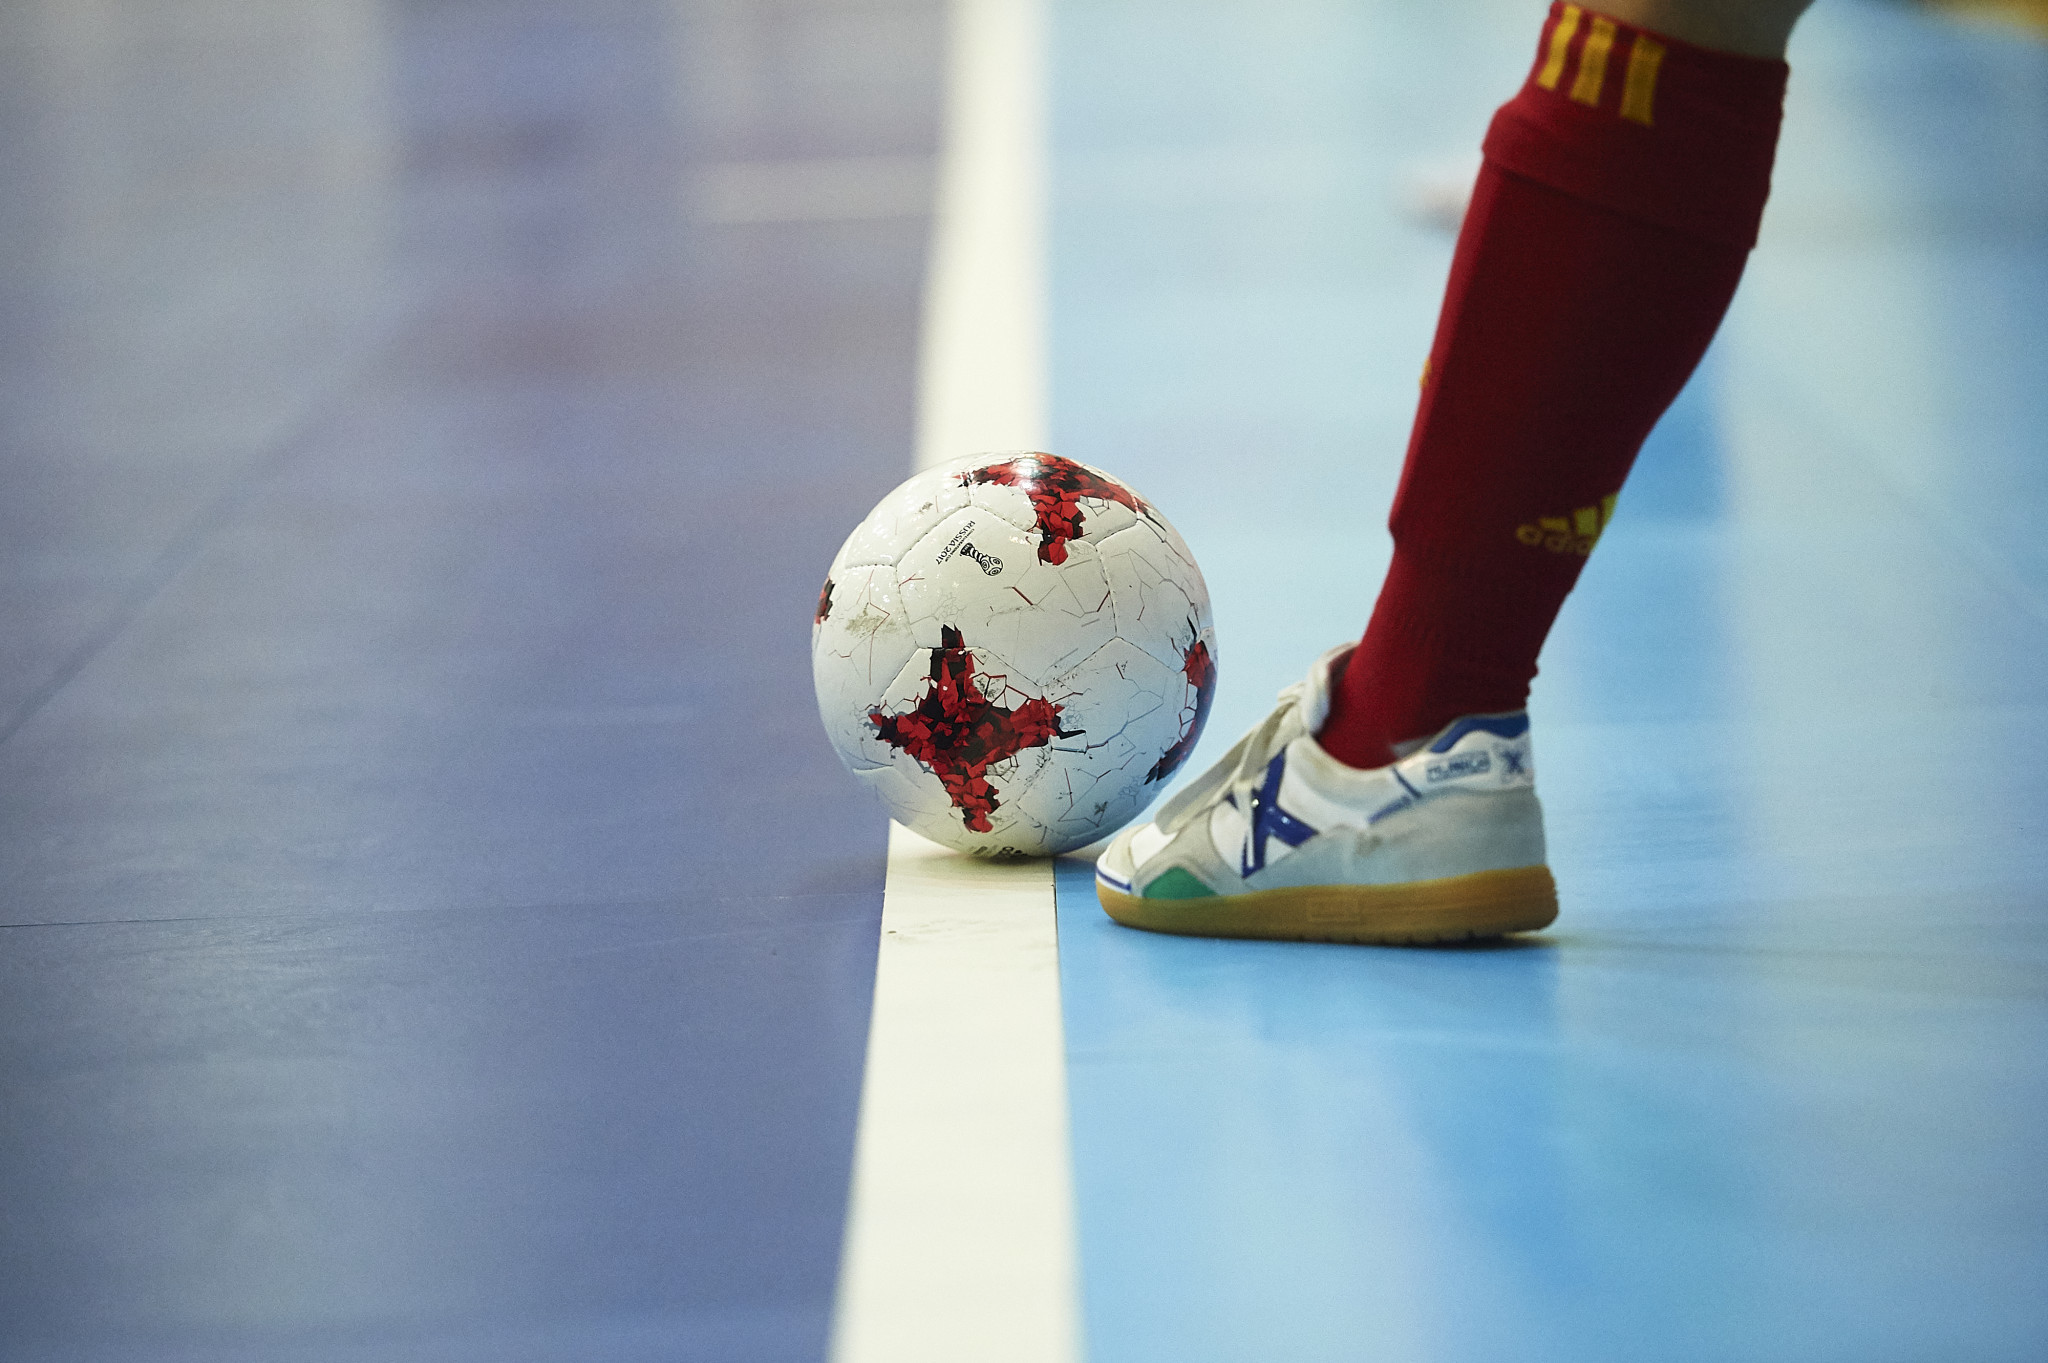 Georgia made it two wins from two in Group D at the UEFA Futsal Euro 2022 ©Getty Images